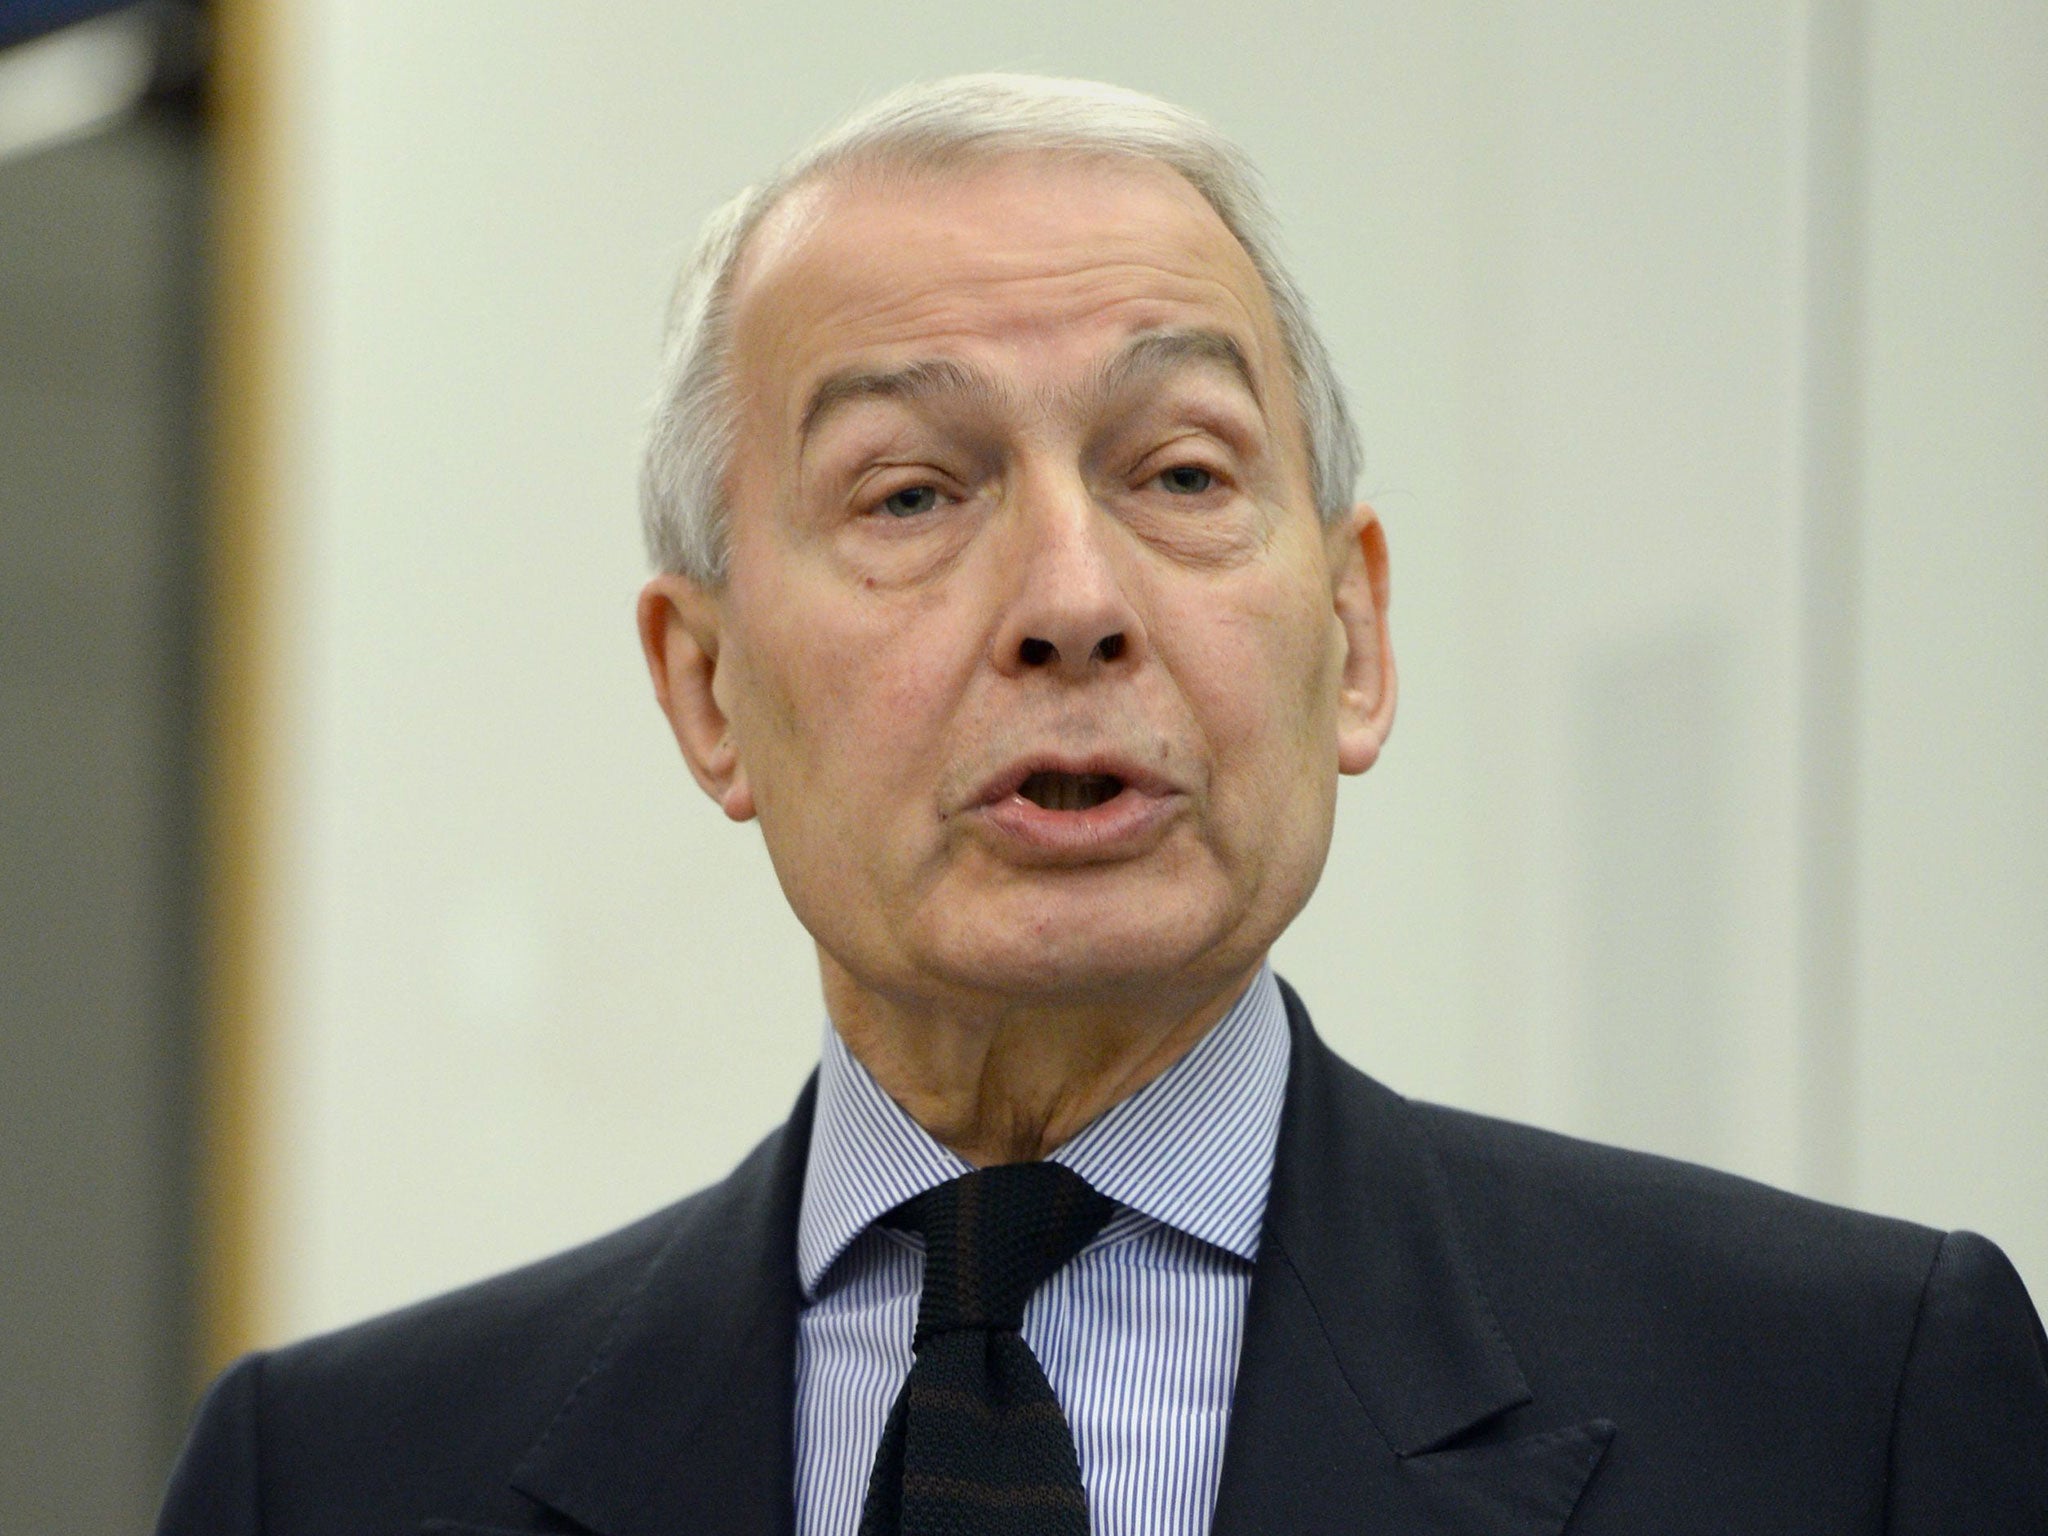 Frank Field has already said the companies show no interest in their employees’ standard of living